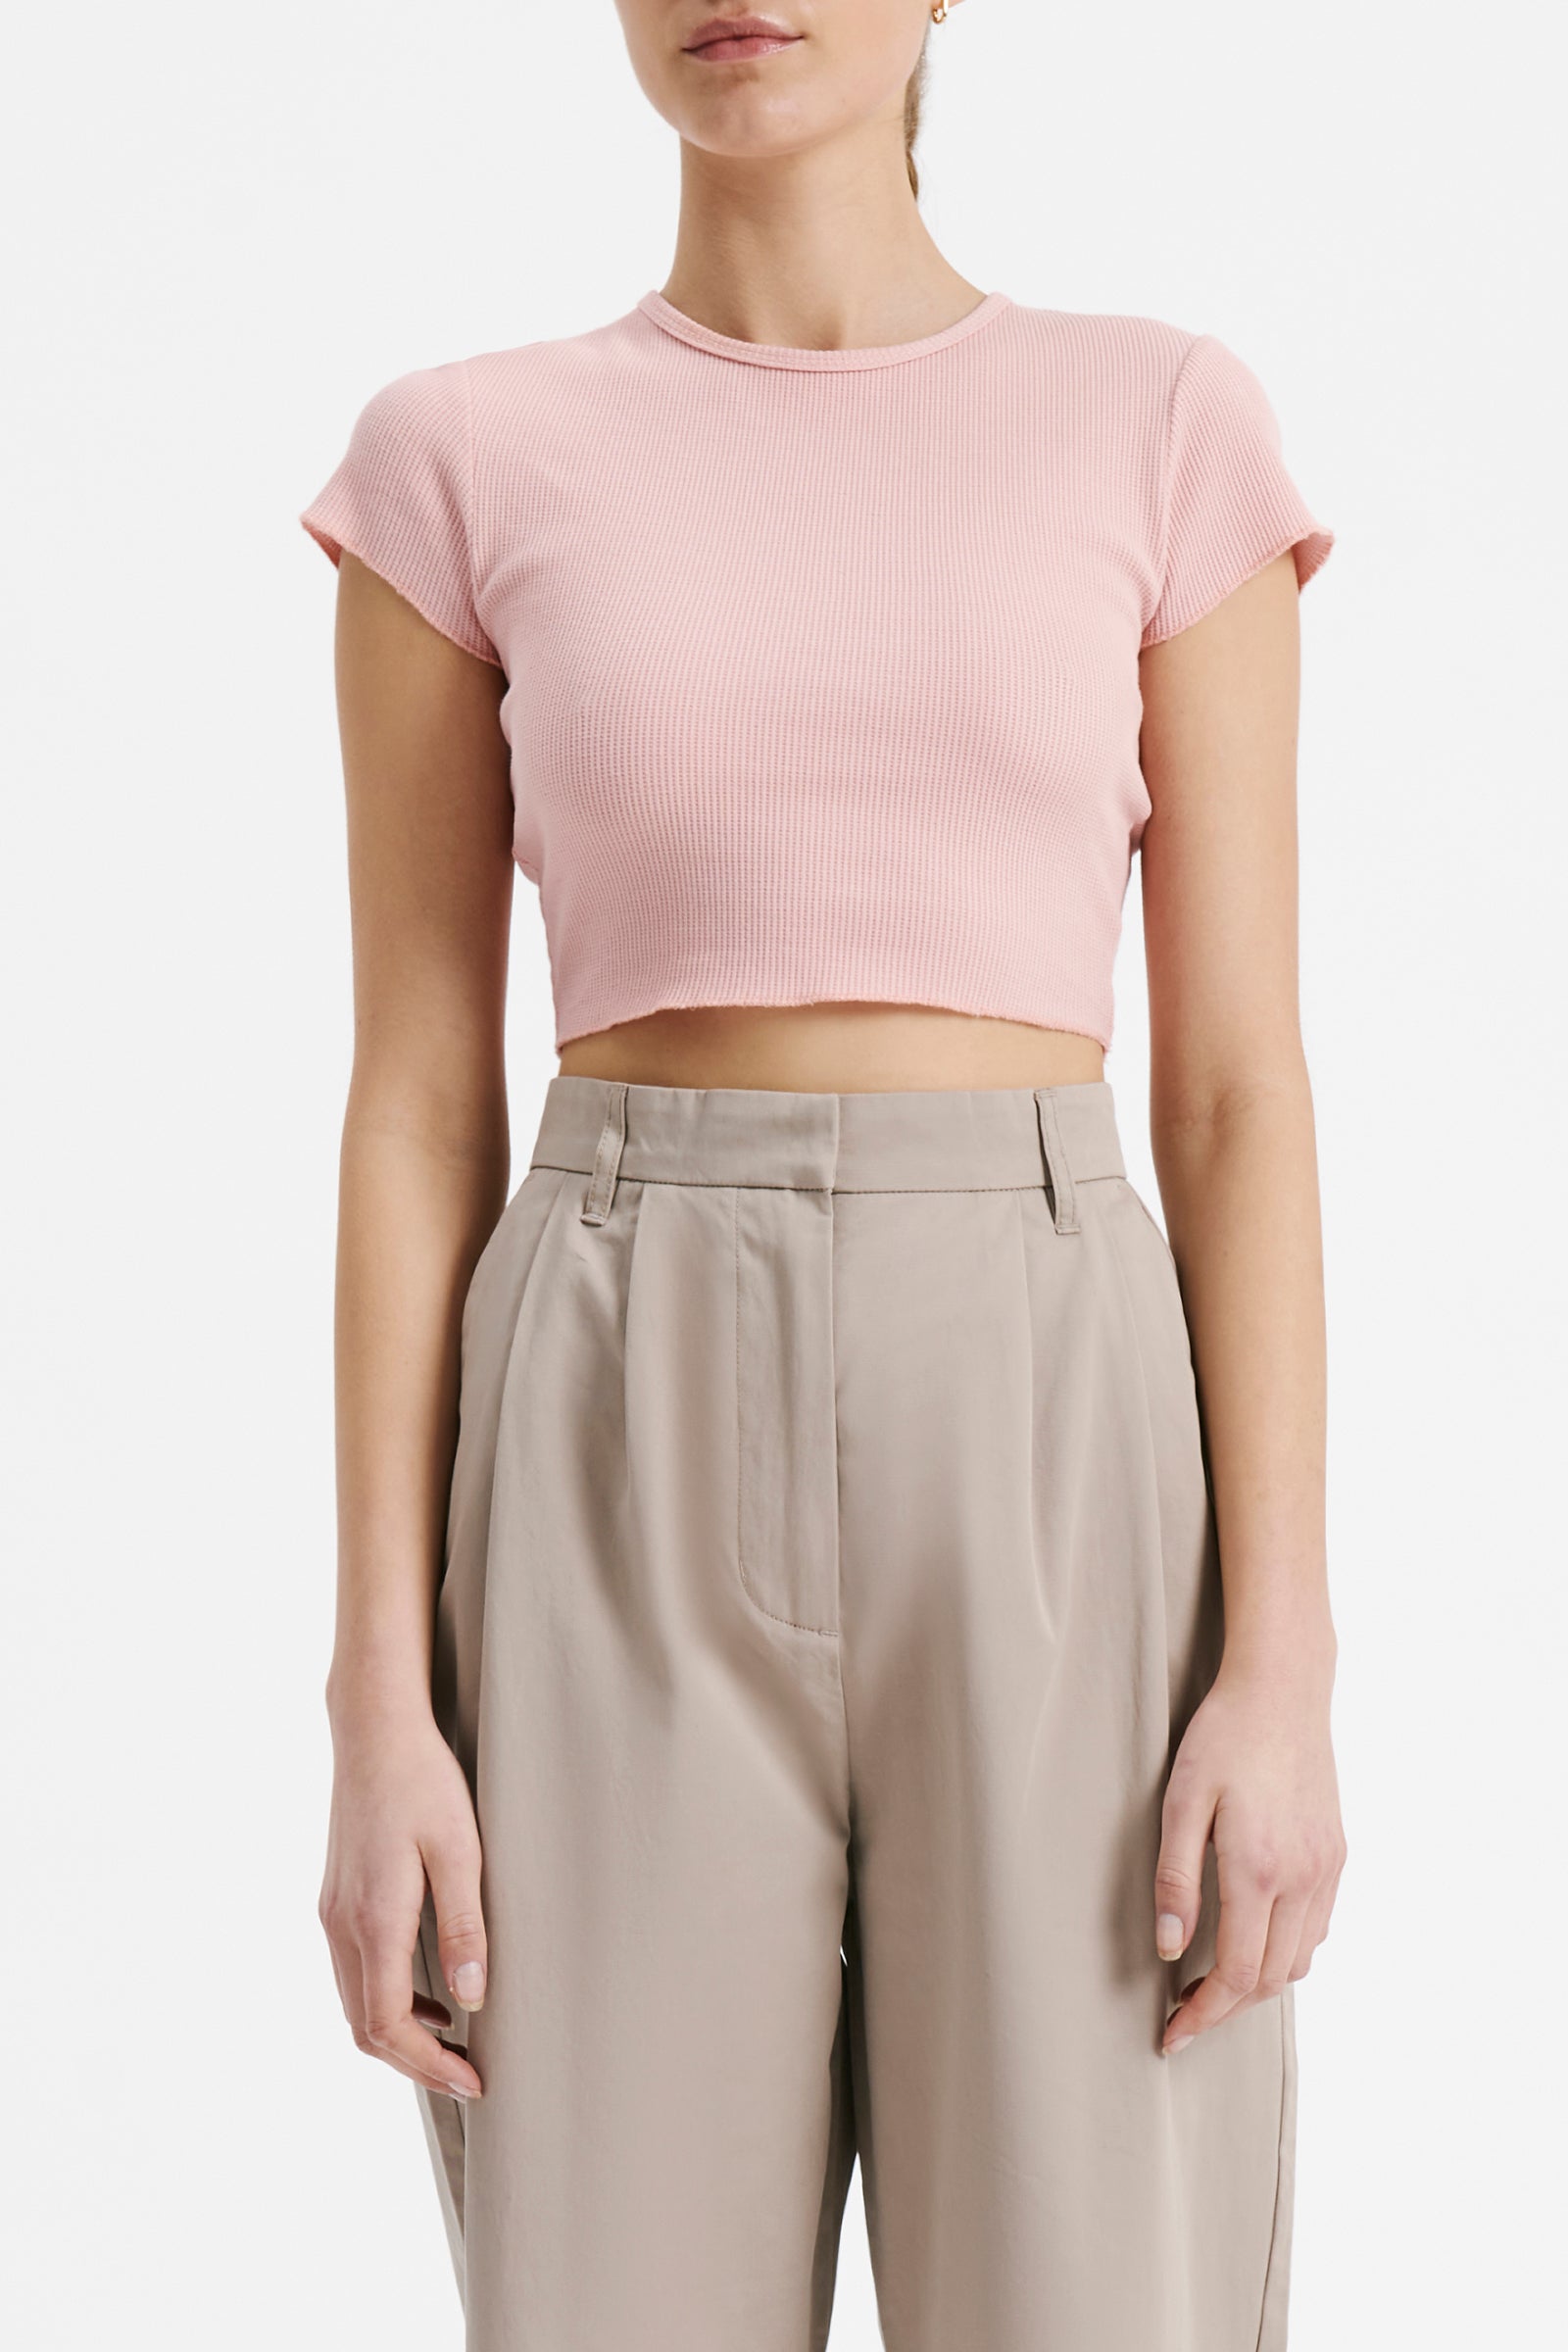 Nude Lucy Cameron Waffle Tee in a Light Pink Guava Colour